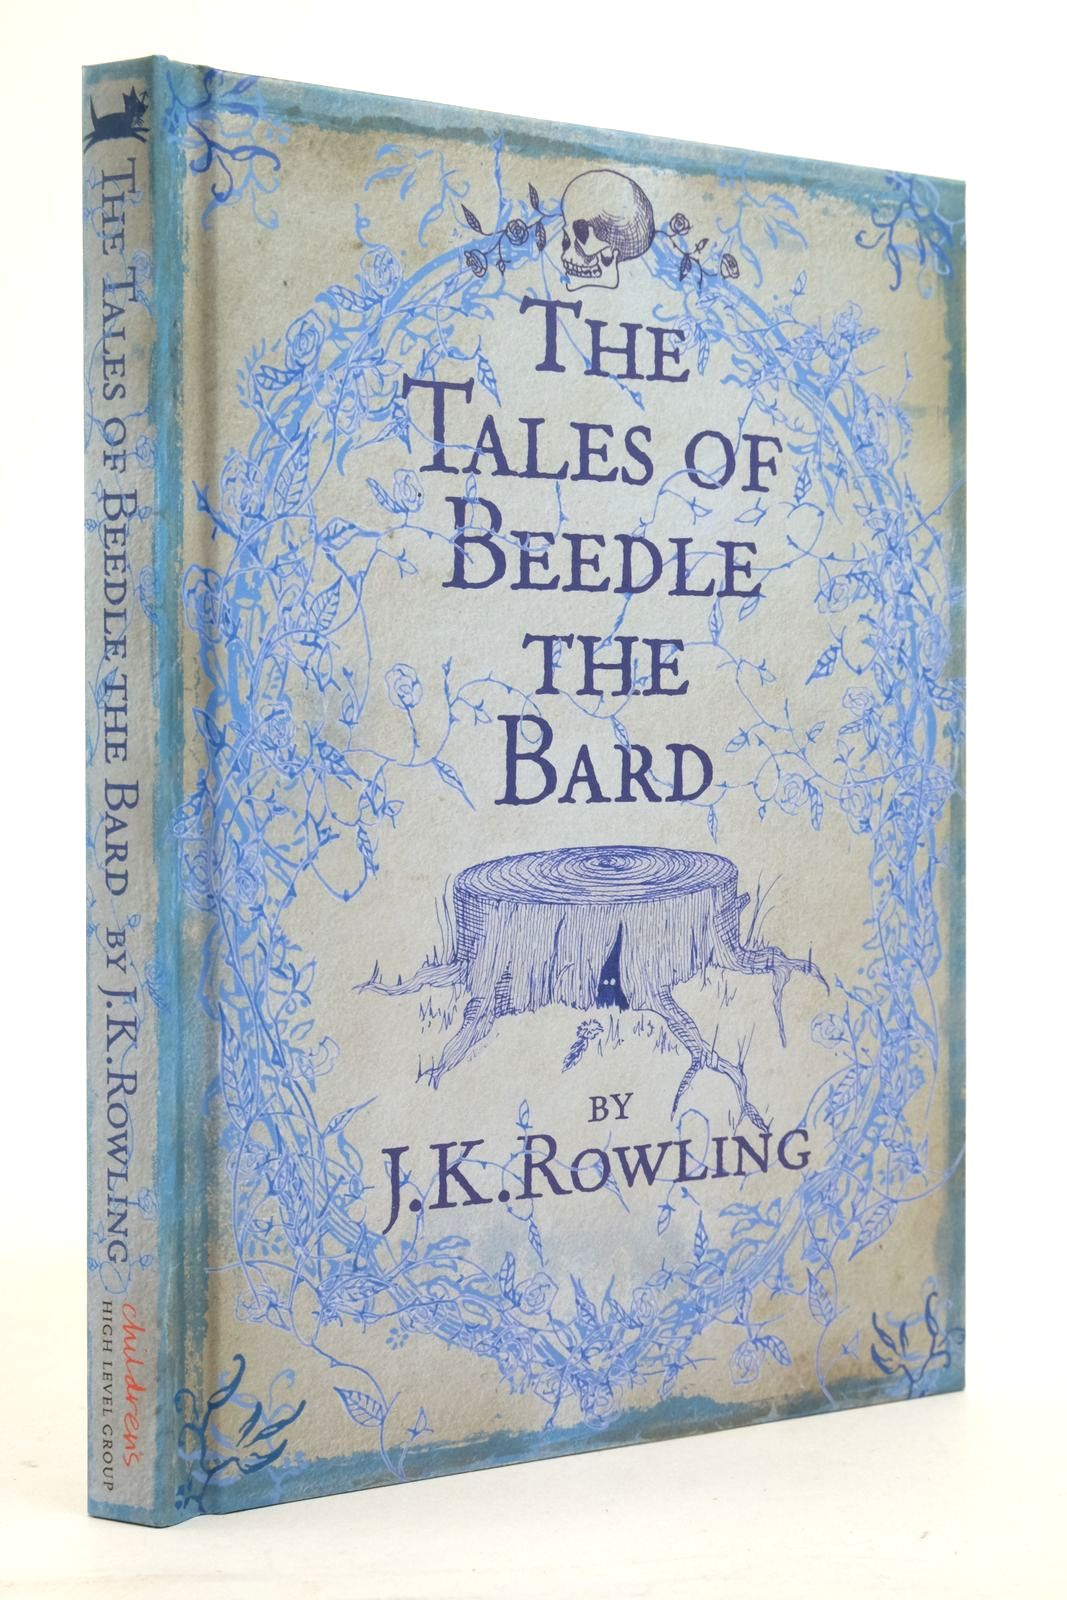 Photo of THE TALES OF BEEDLE THE BARD written by Rowling, J.K. illustrated by Rowling, J.K. published by The Children's High Level Group, Bloomsbury (STOCK CODE: 2137954)  for sale by Stella & Rose's Books